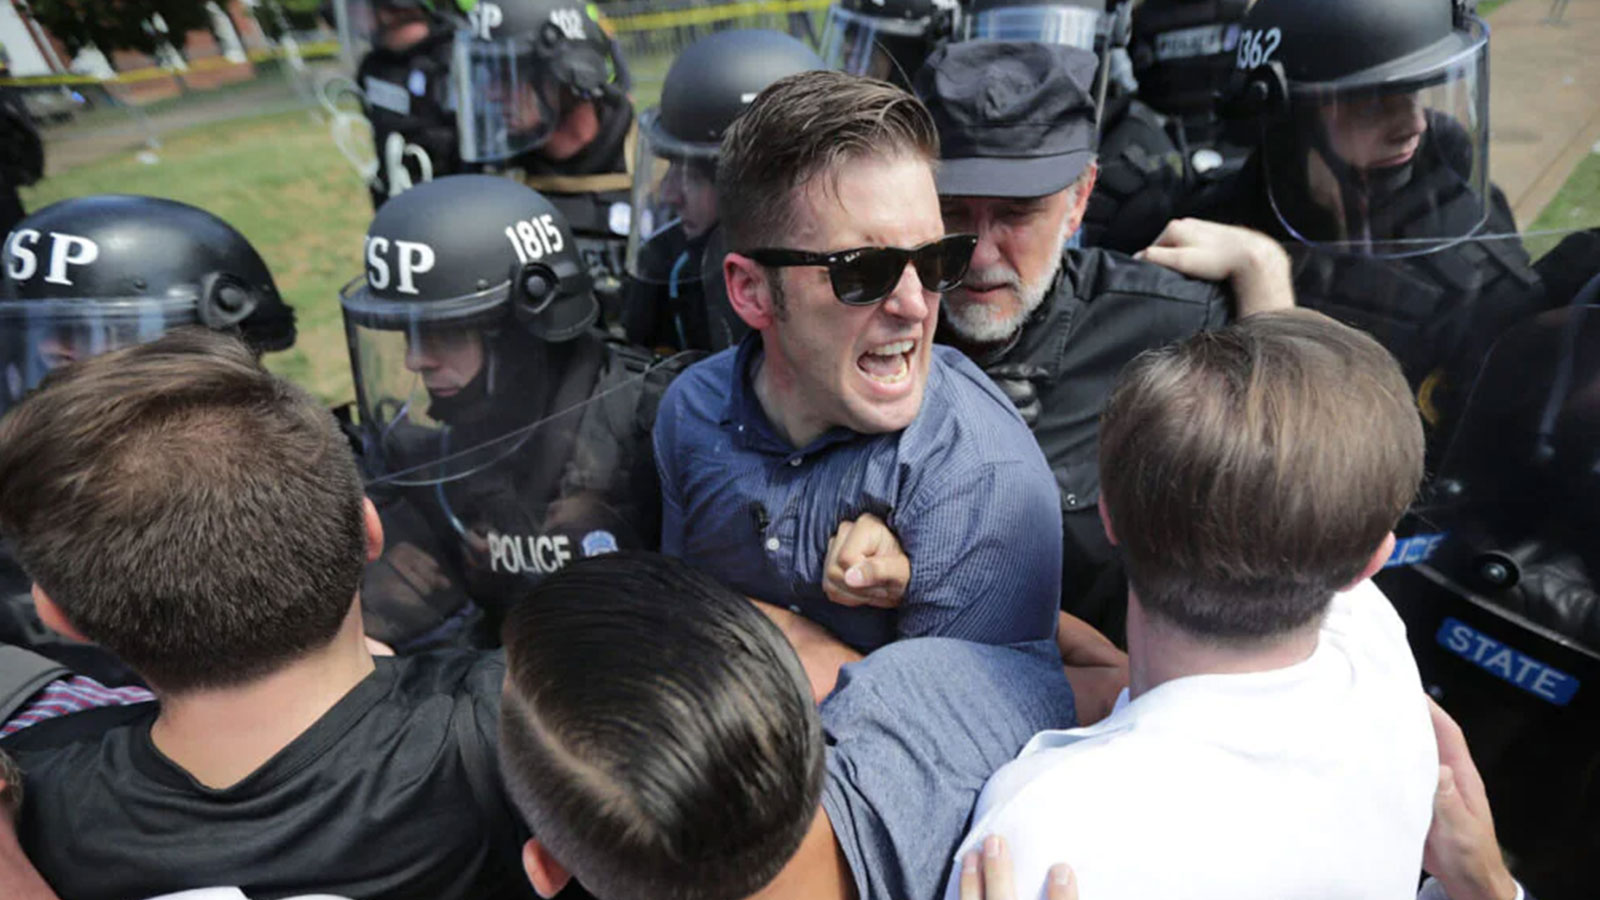 White nationalist Richard Spencer (C) and his supporters clash with Virginia State Police in Emancipation Park after the “Unite the Right” rally was declared an unlawful gathering August 12, 2017 in Charlottesville, Virginia.